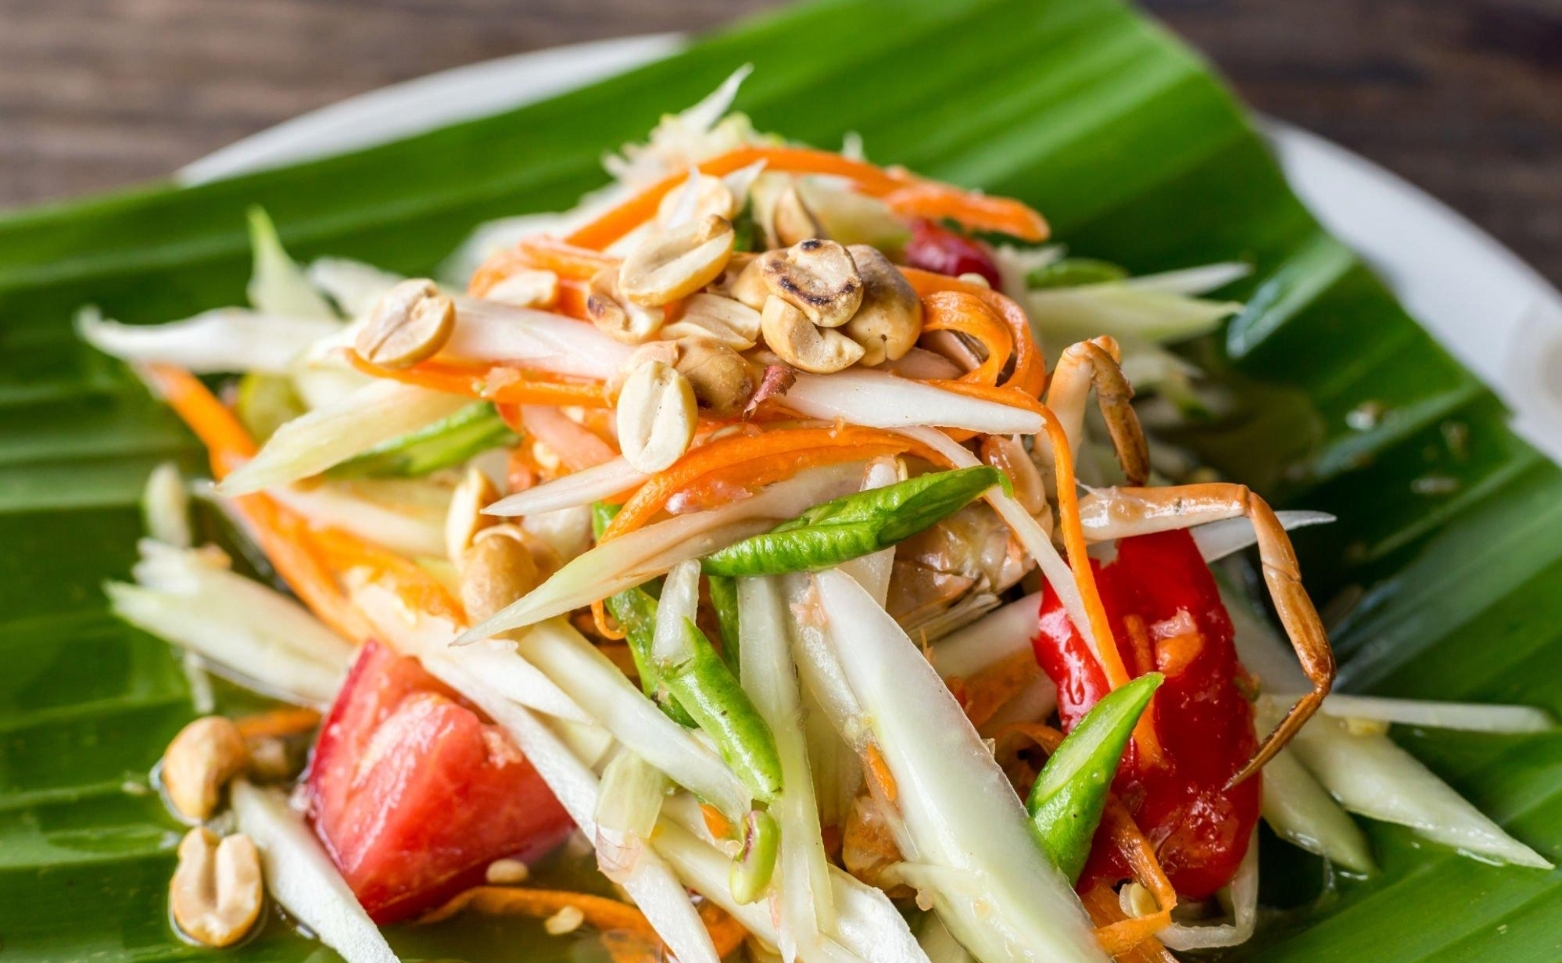 What Are the 4 Types of Thai Salad?